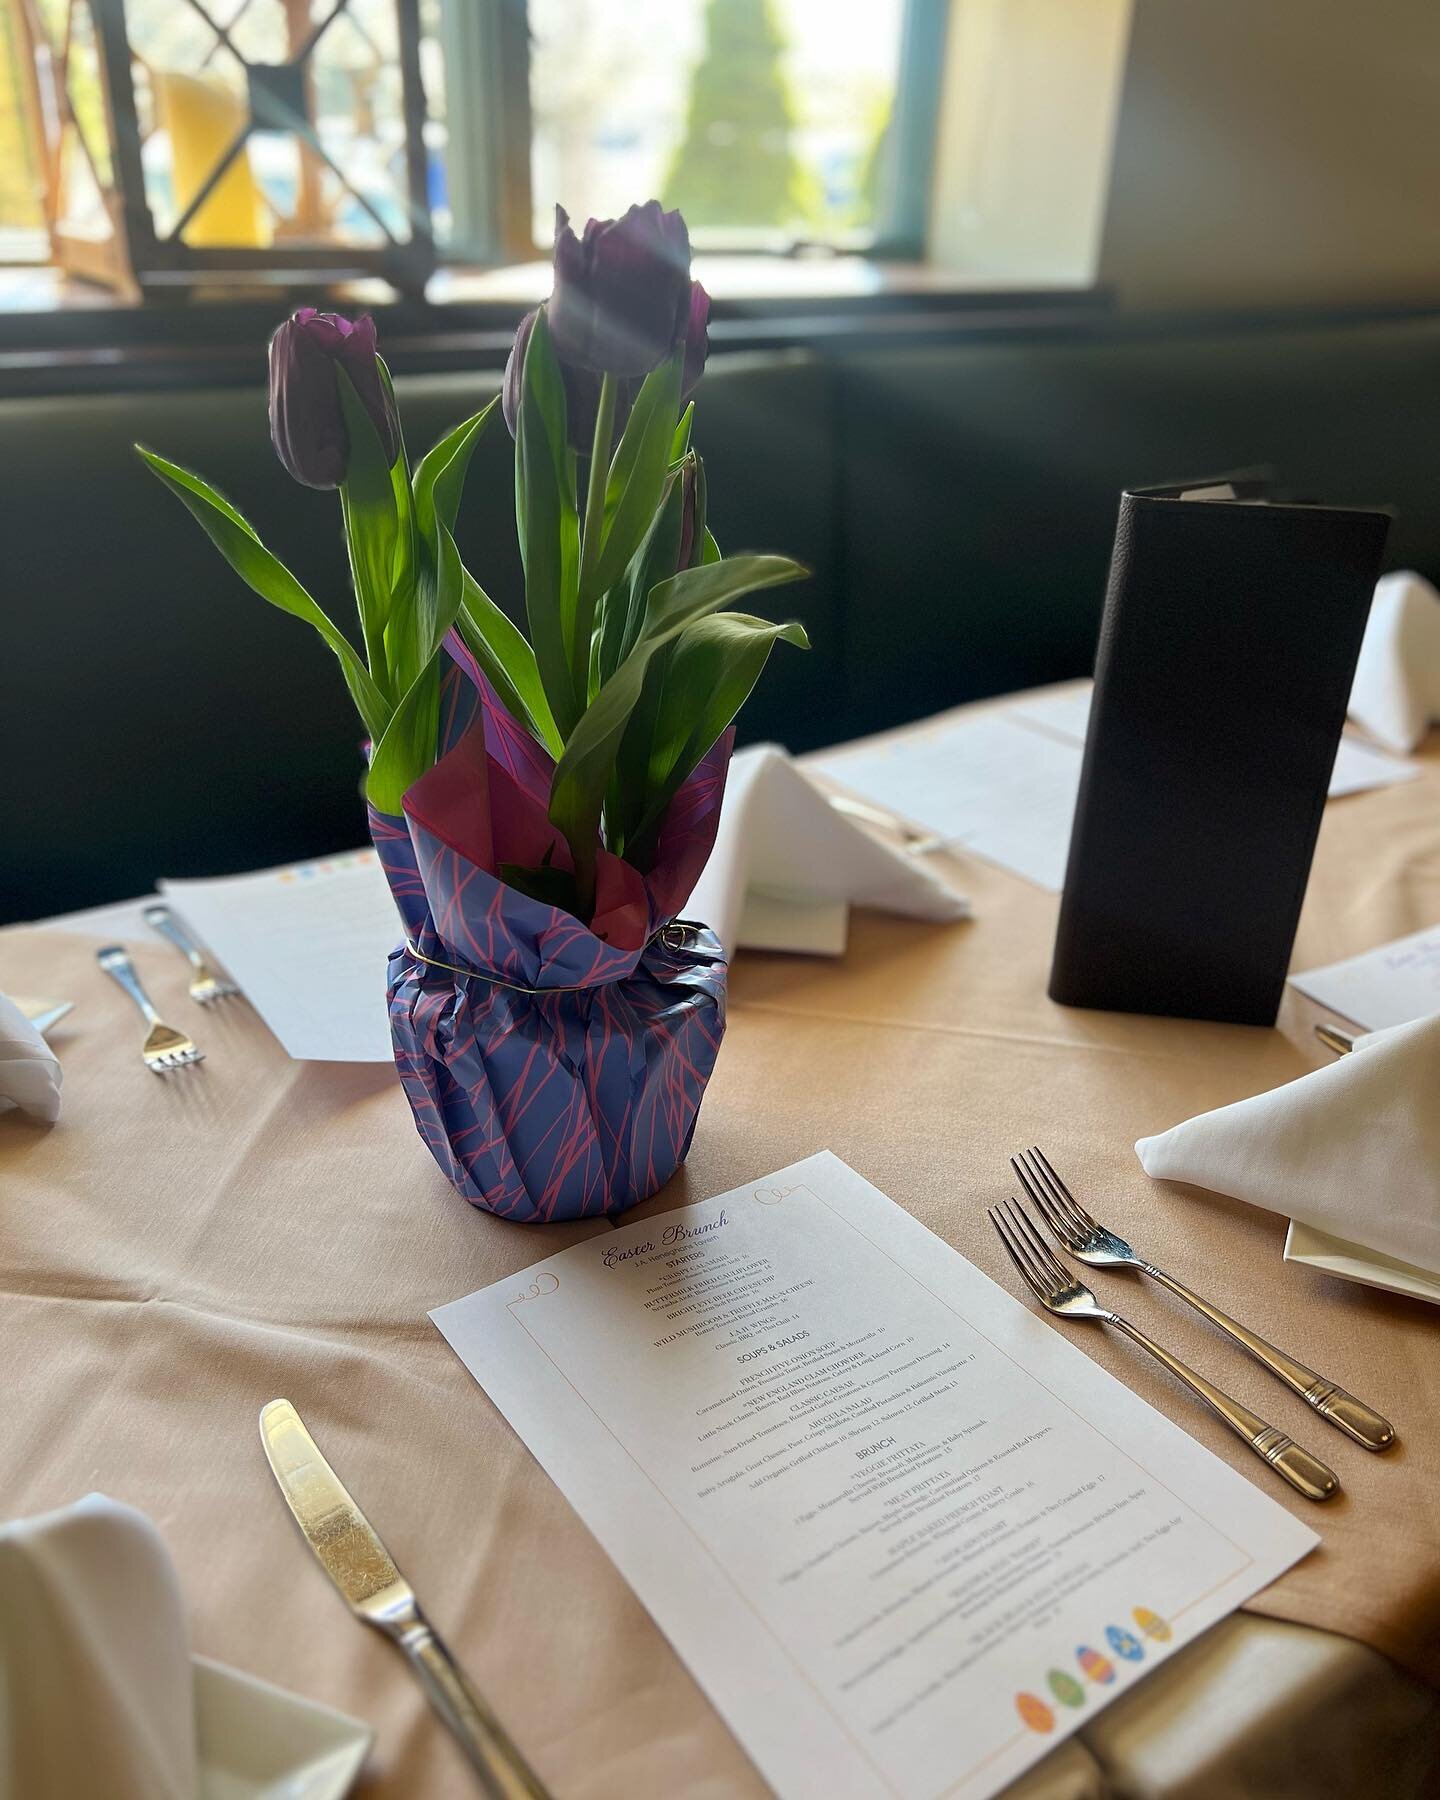 Happy Easter 🐰🍳💐 Come on in and join us for brunch with our complimentary pastry bar! We will also be open until 8pm for dinner - not too late to make a reservation so give us a call!